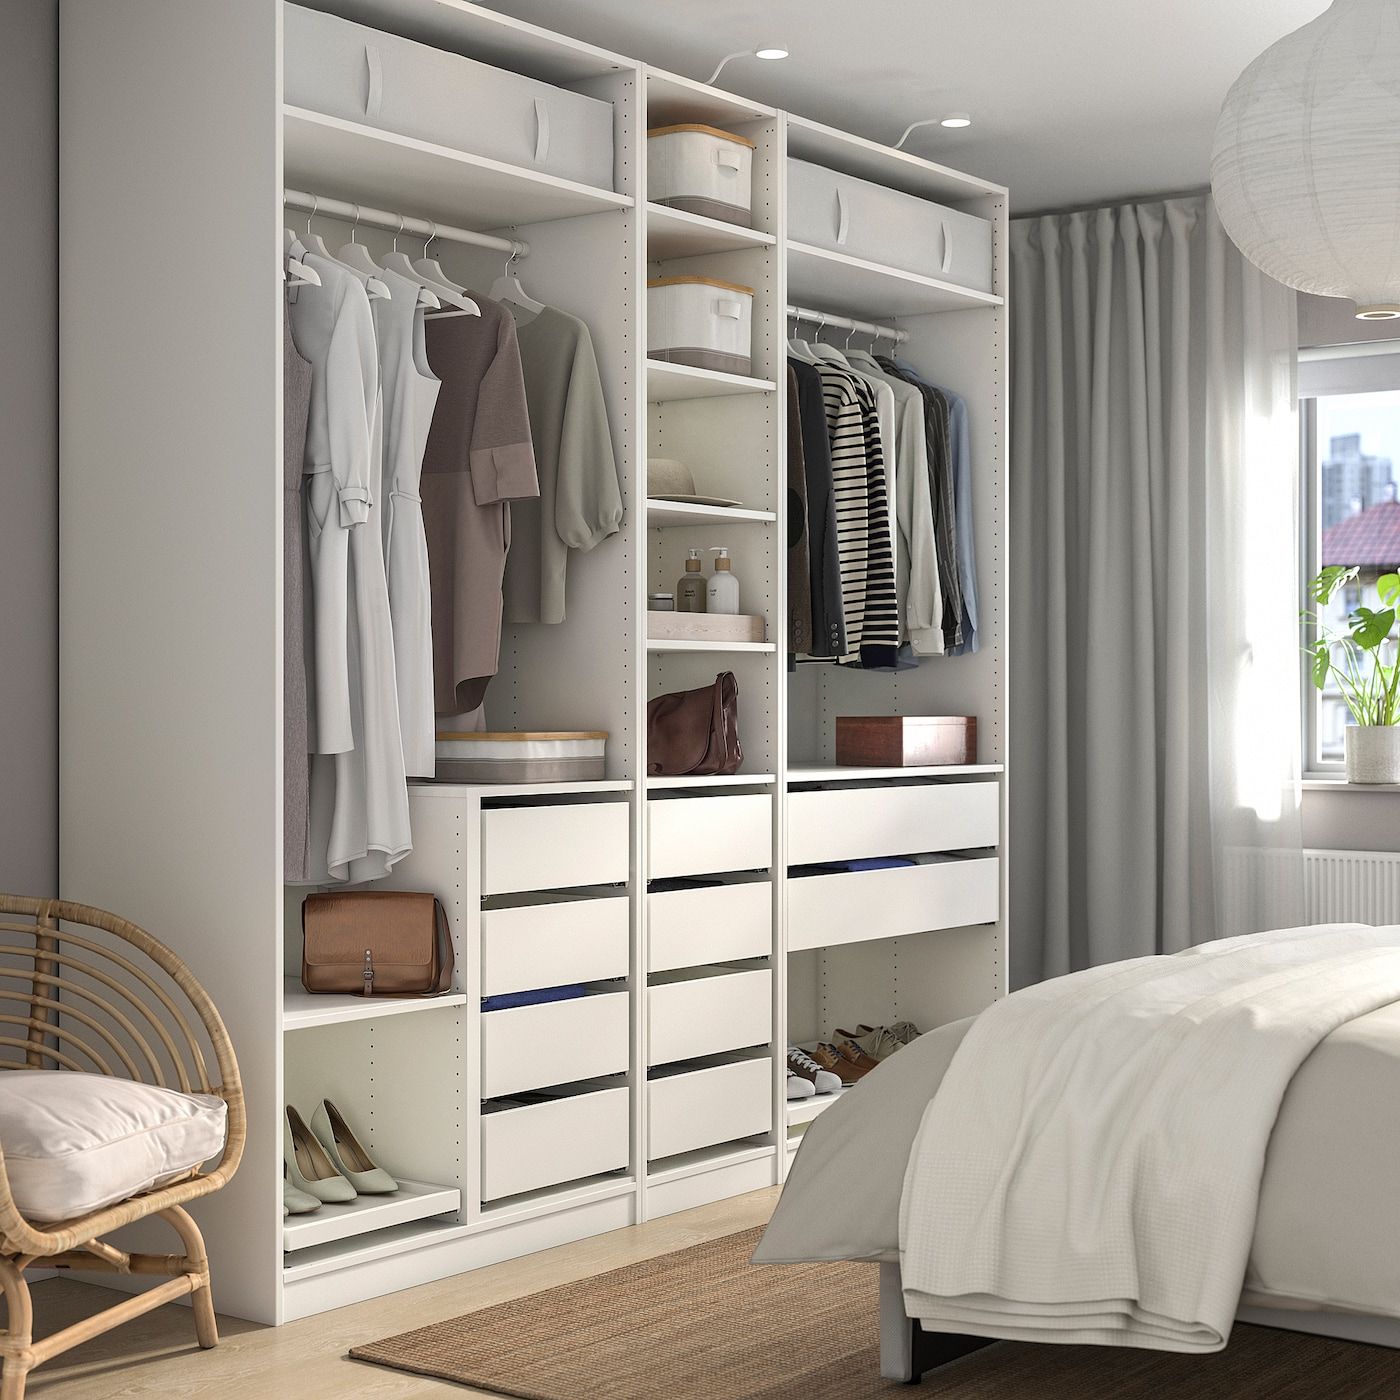 Pax Wardrobe Combination, White, 983/8x227/8x931/8" – Ikea Regarding Wardrobes And Drawers Combo (Gallery 2 of 20)